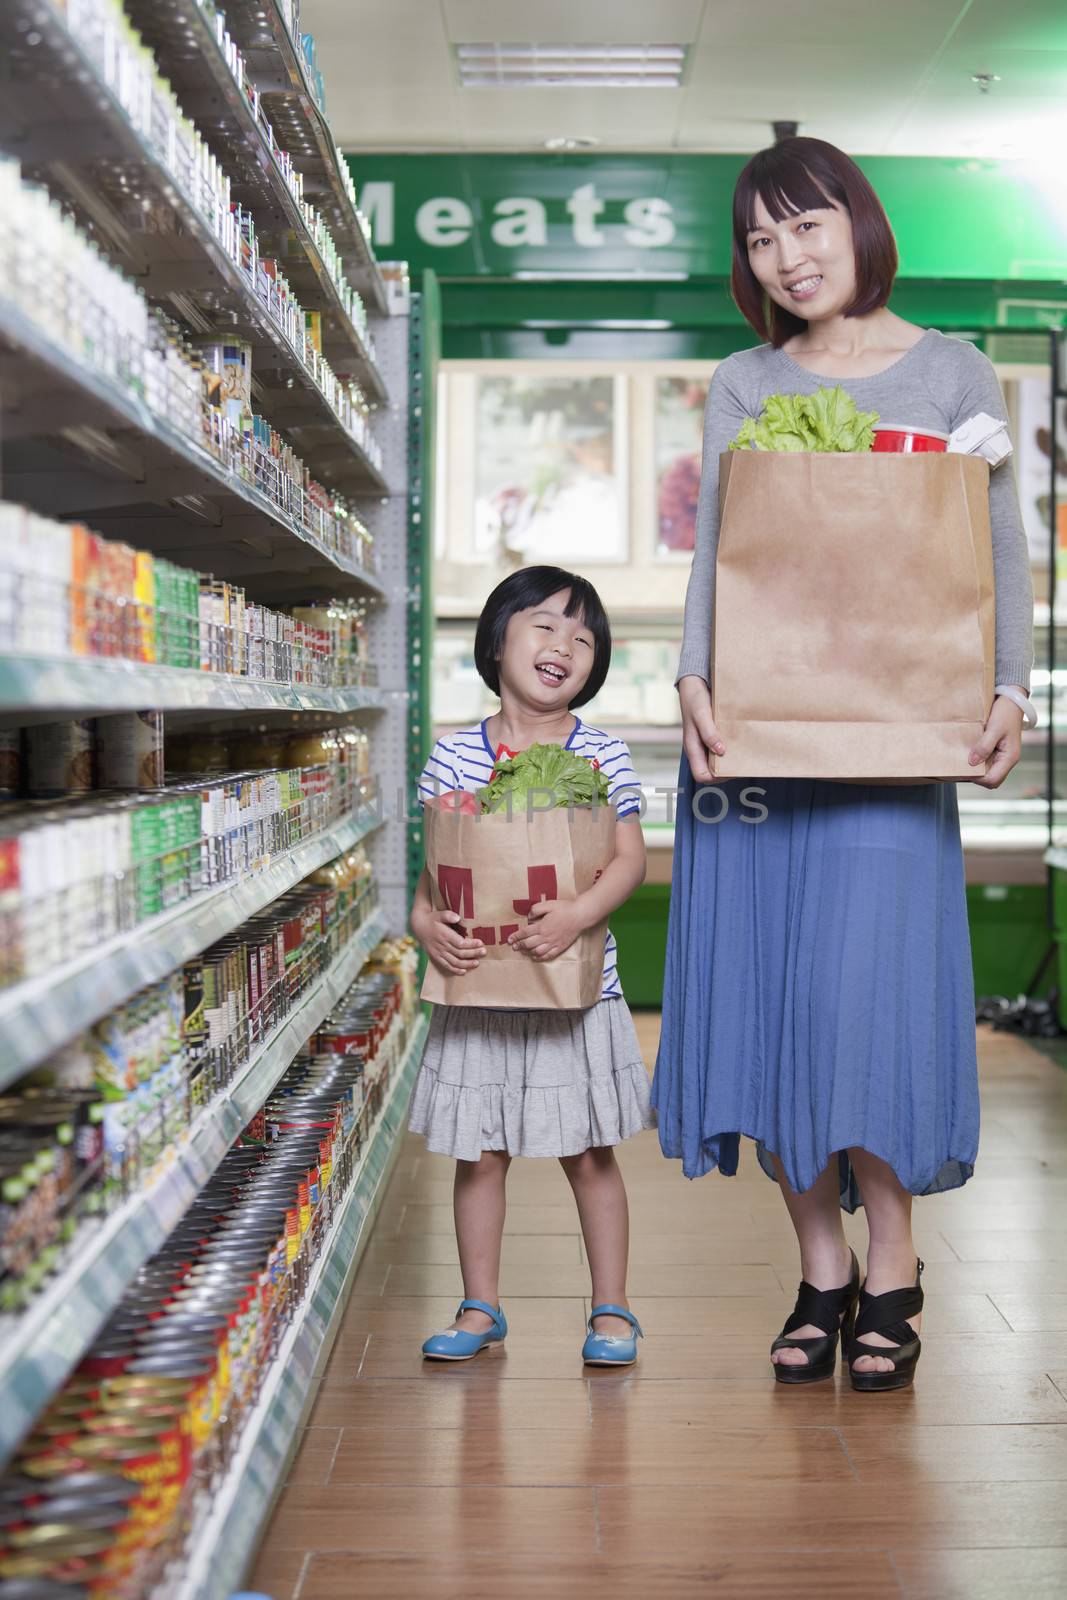 Mother and daughter holding grocery bags in supermarket, Beijing